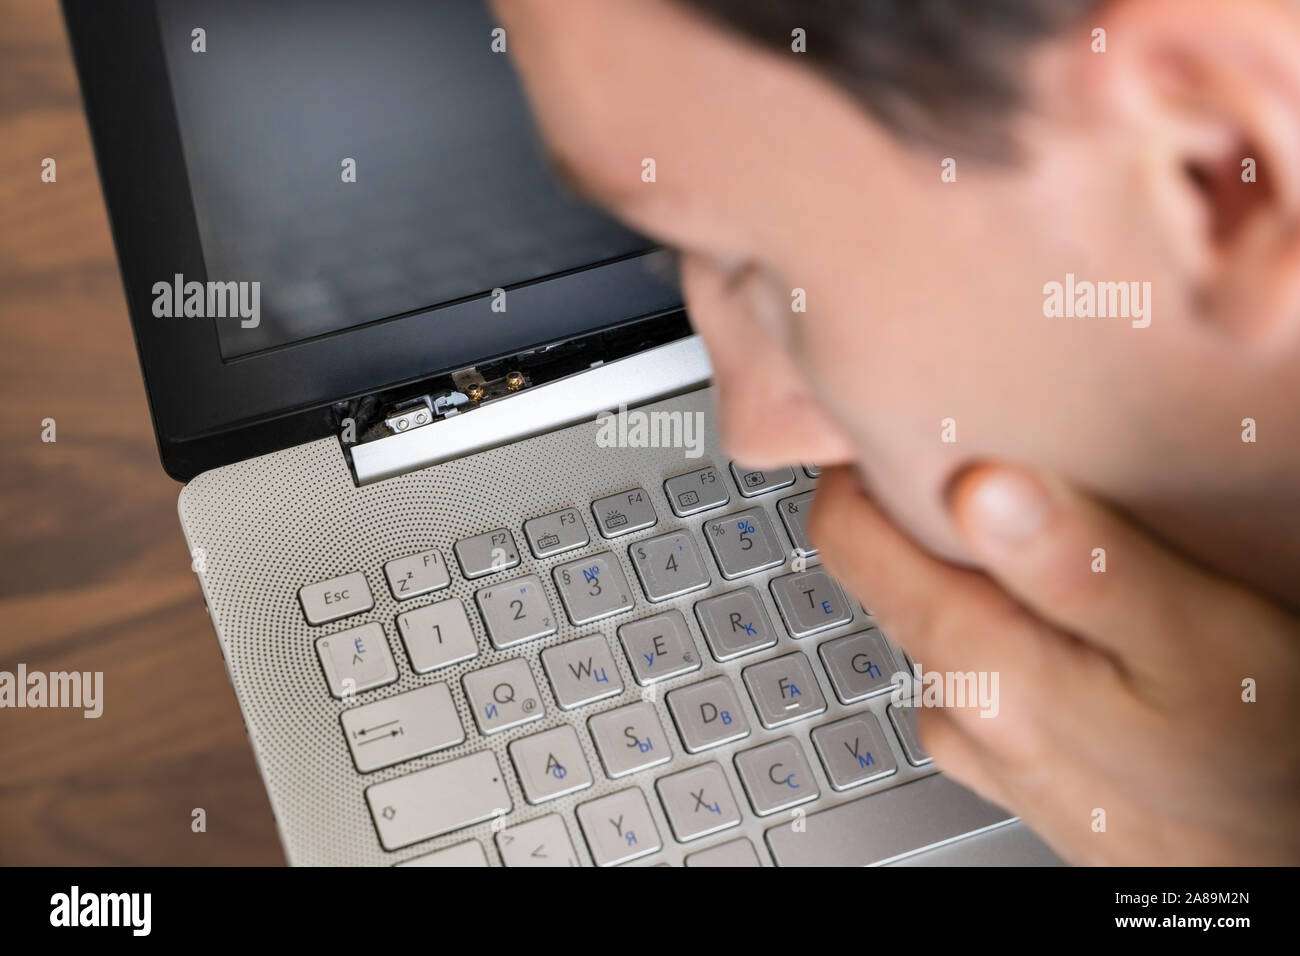 Man Looking At Damaged Laptop Computer With Broken Screen Attachment Stock Photo